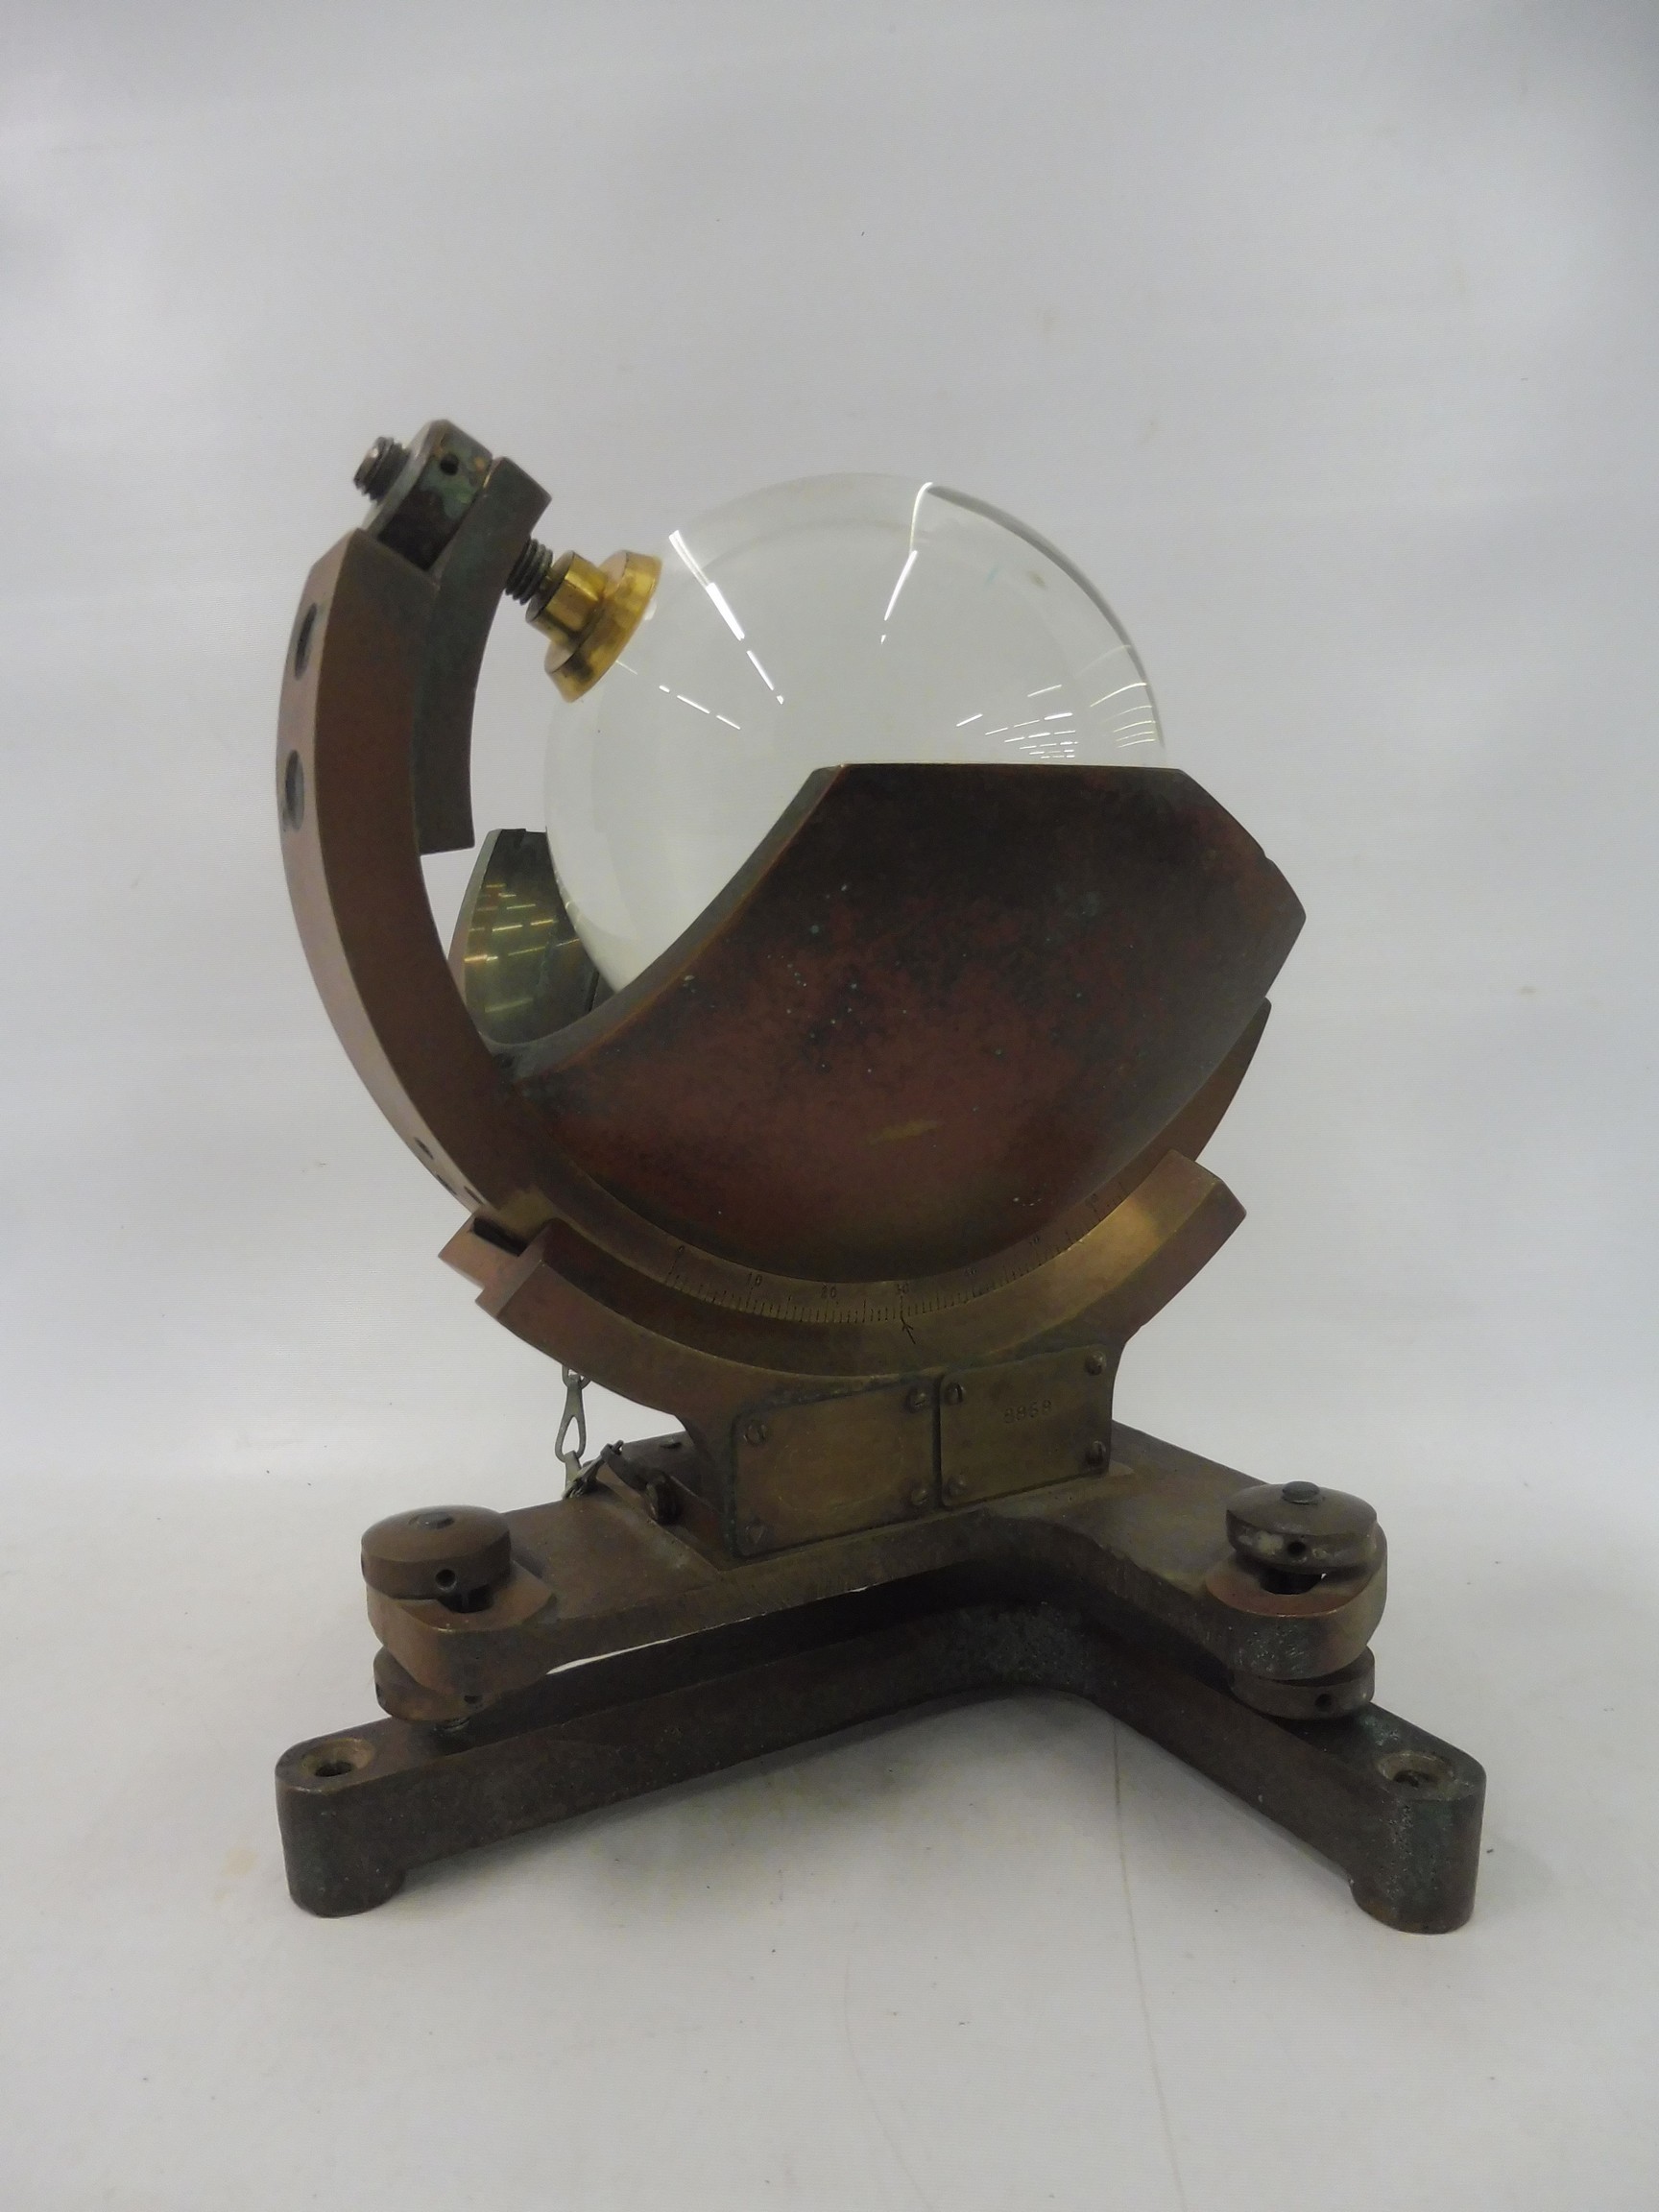 An unusual and good quality sunshine recorder for a tropical climate, by Casella of London, no. - Image 4 of 5